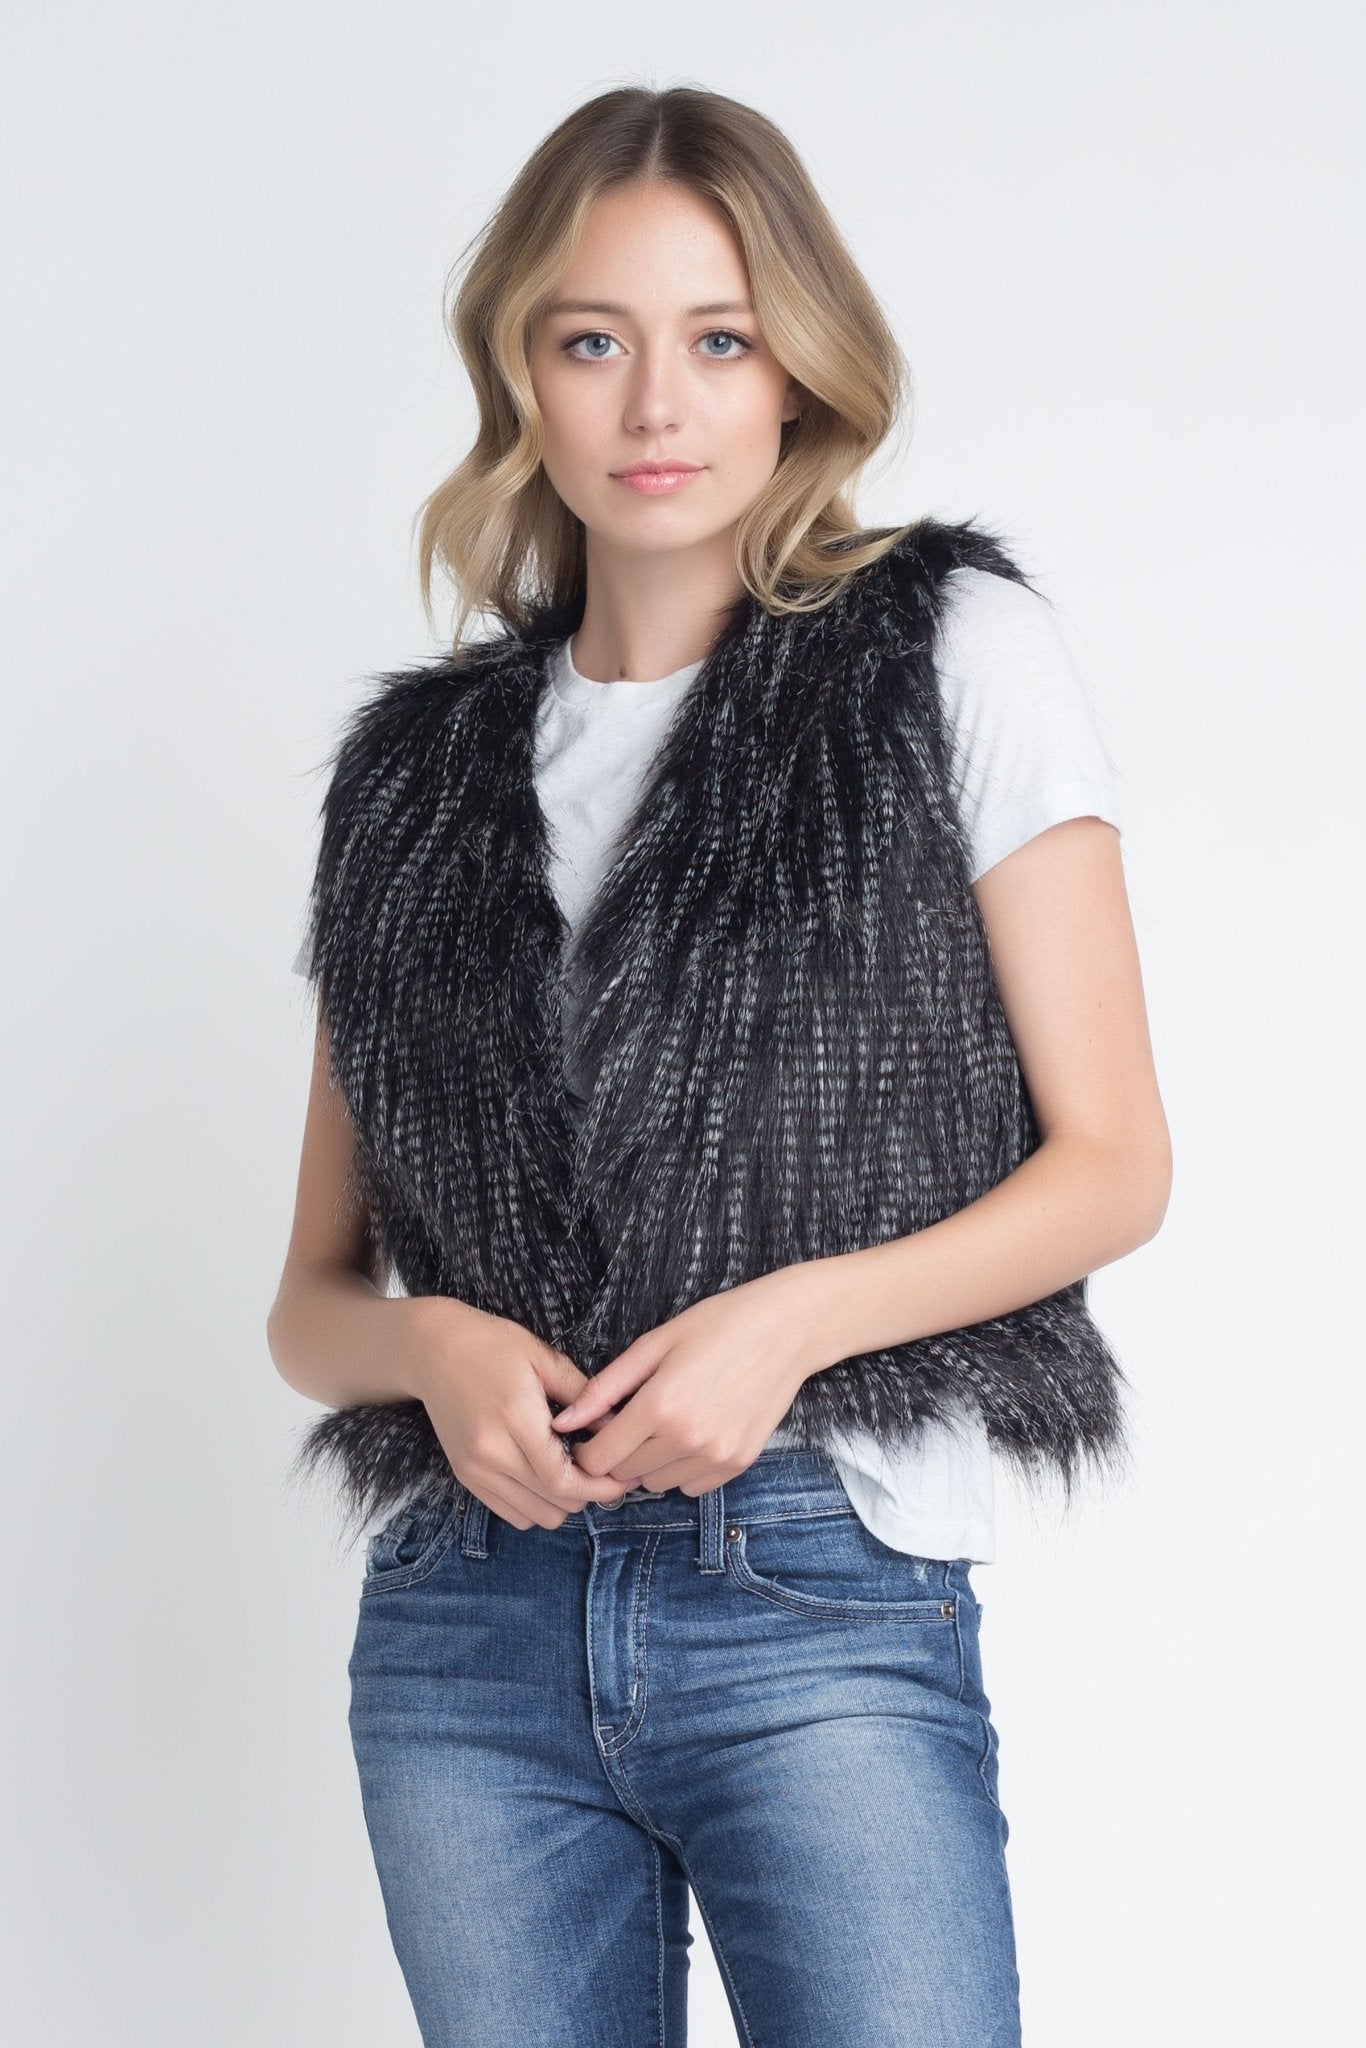 Women's Faux Fur Sleeveless Vest - BeExtra! Apparel & More